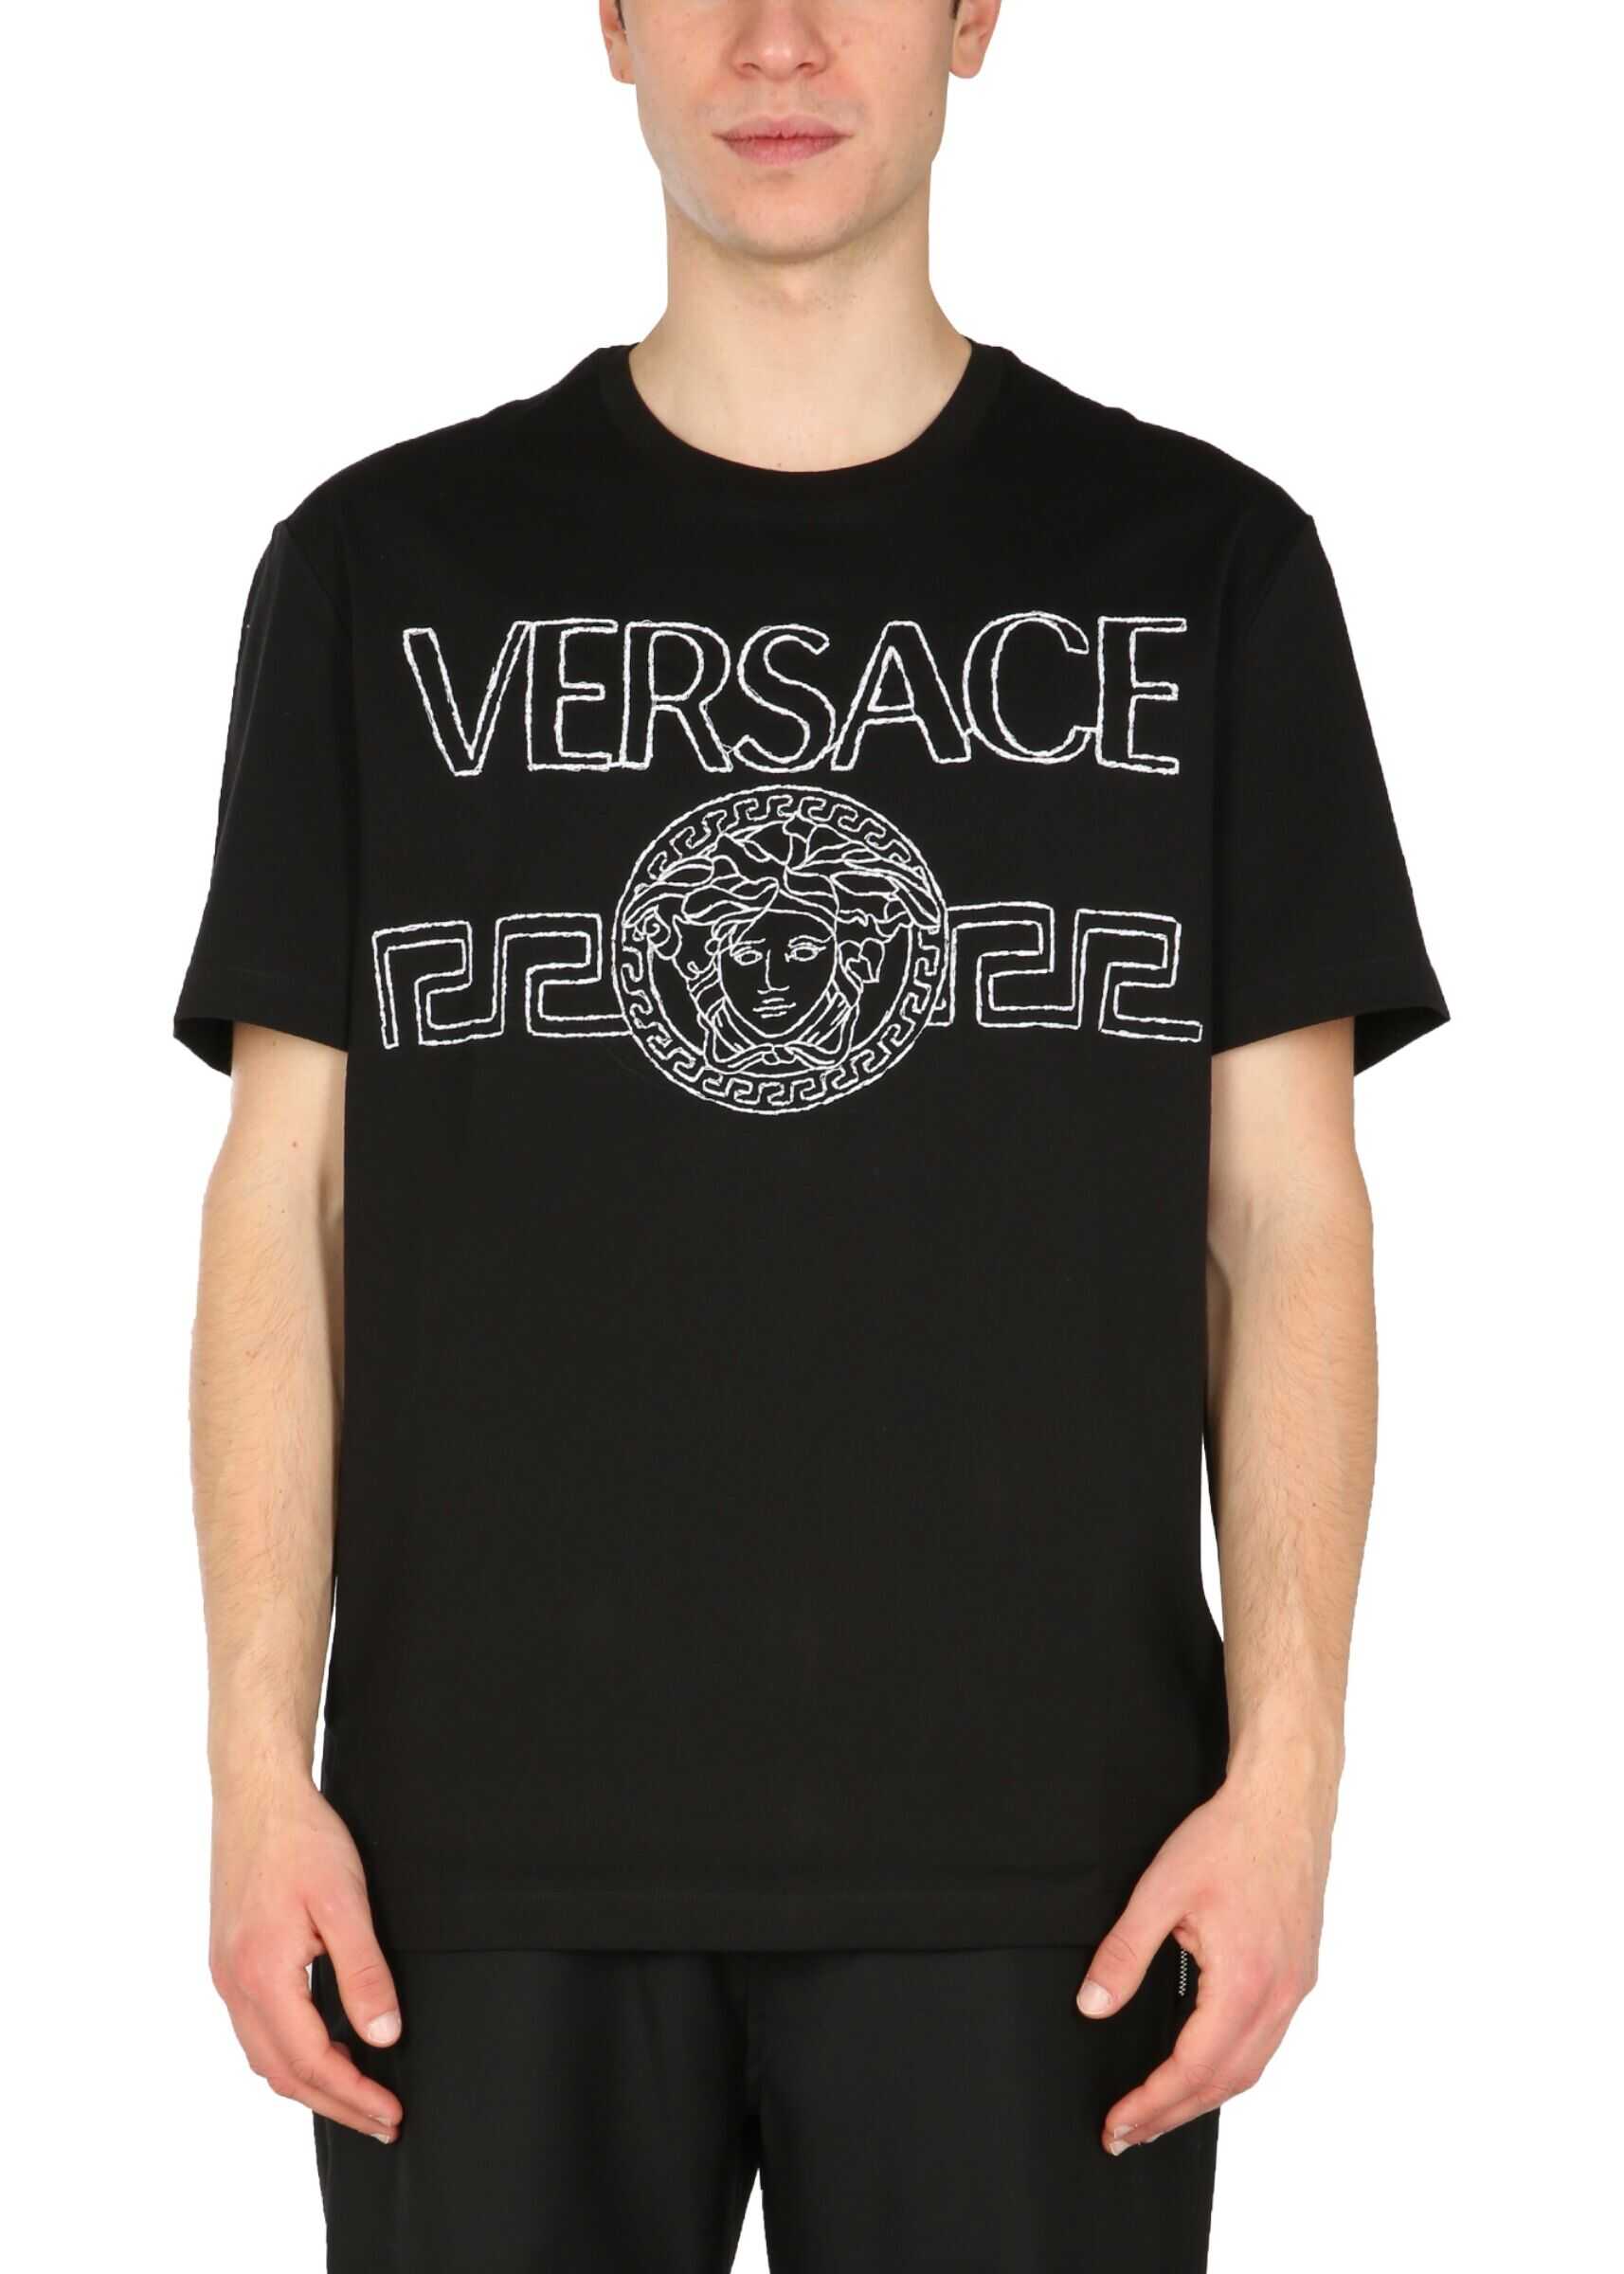 Versace T-Shirt With Embroidered Medusa Logo 1001280_1A009151B000 BLACK